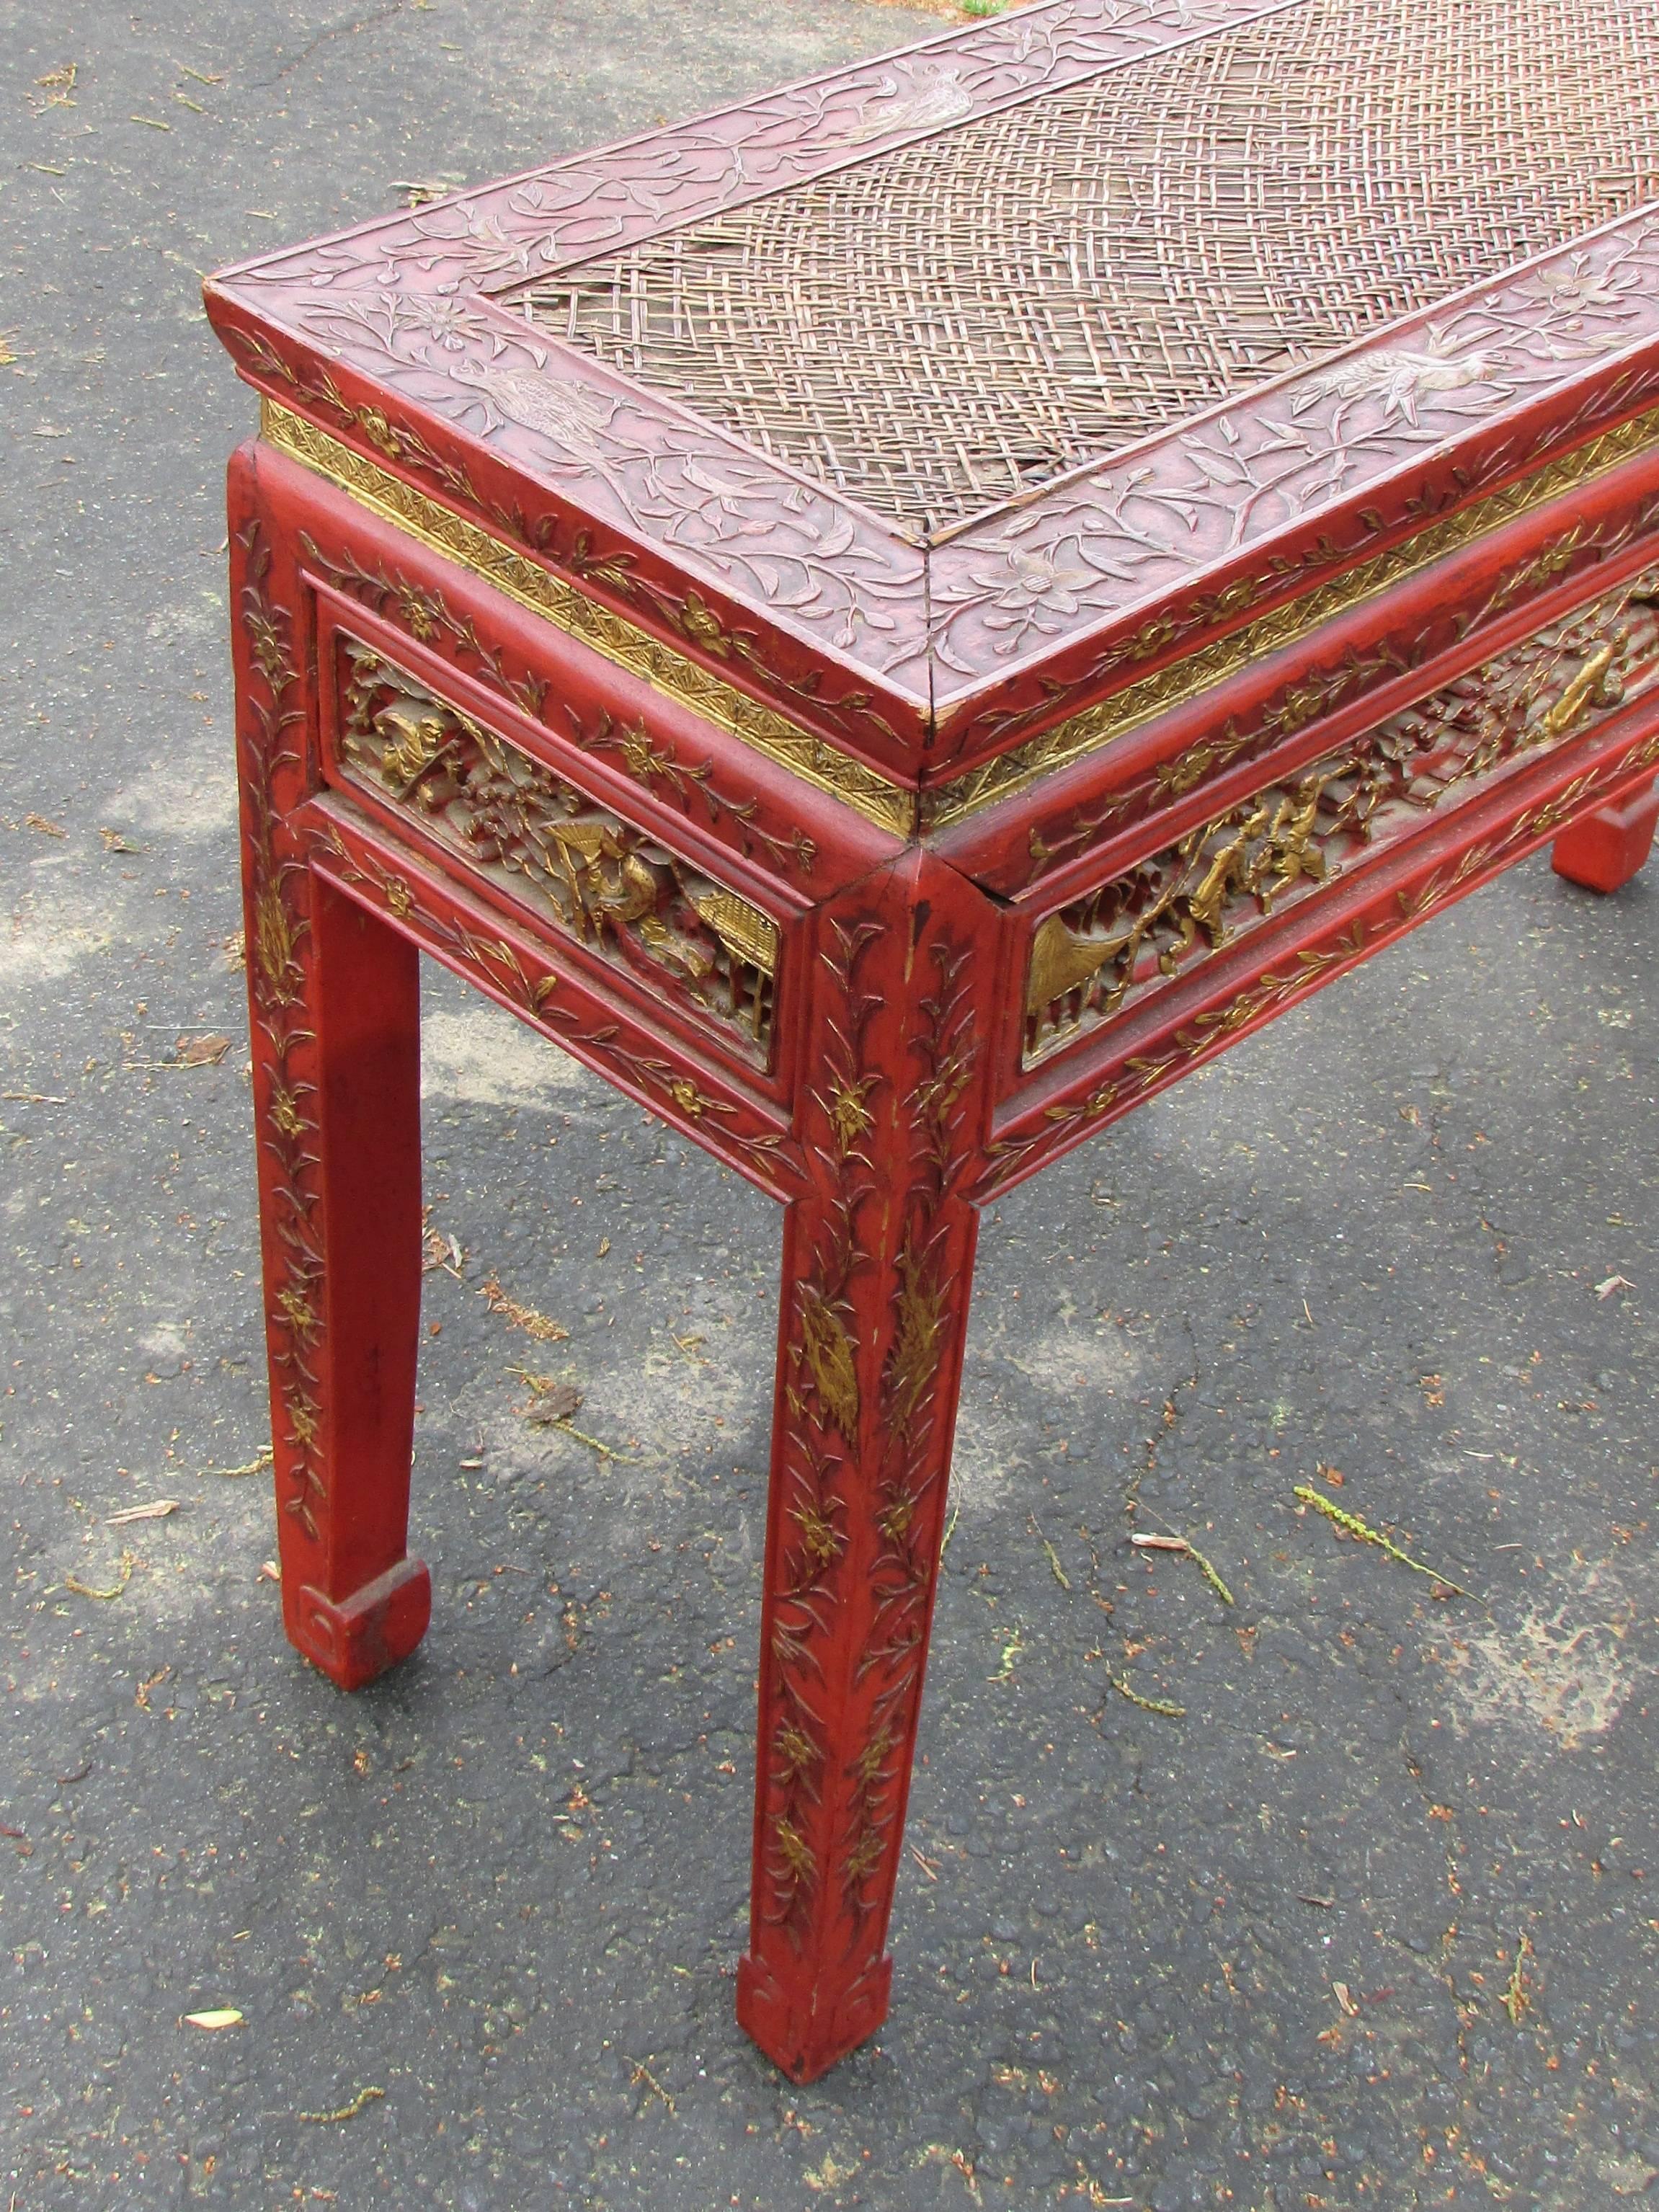 Red lacquer and gold hand carved chinoiserie console table with rattan top. This table is in original condition showing age and loss to one panel and to rattan top.